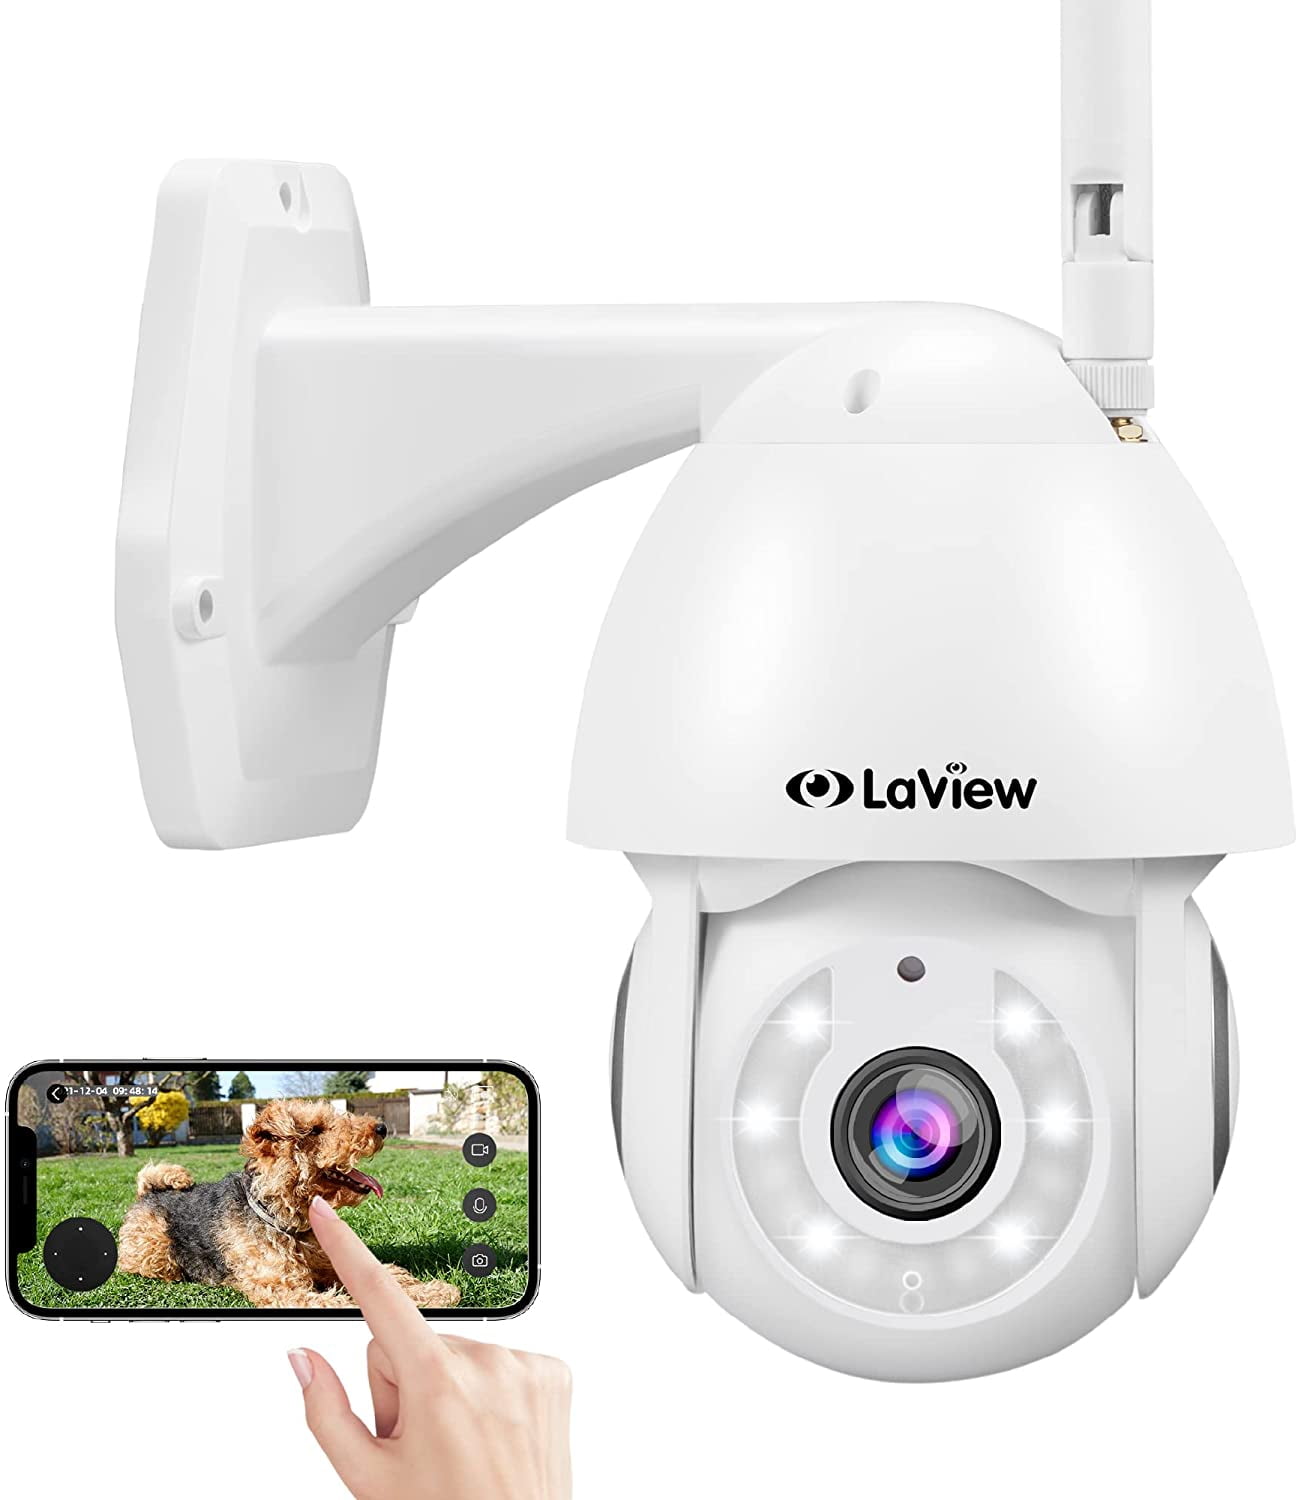 Laview 4MP Cameras for Home Security,270°View Range 2K Security Camera Outdoor with Starlight Color Night Vision,Audible Alarm,Human Detection,US